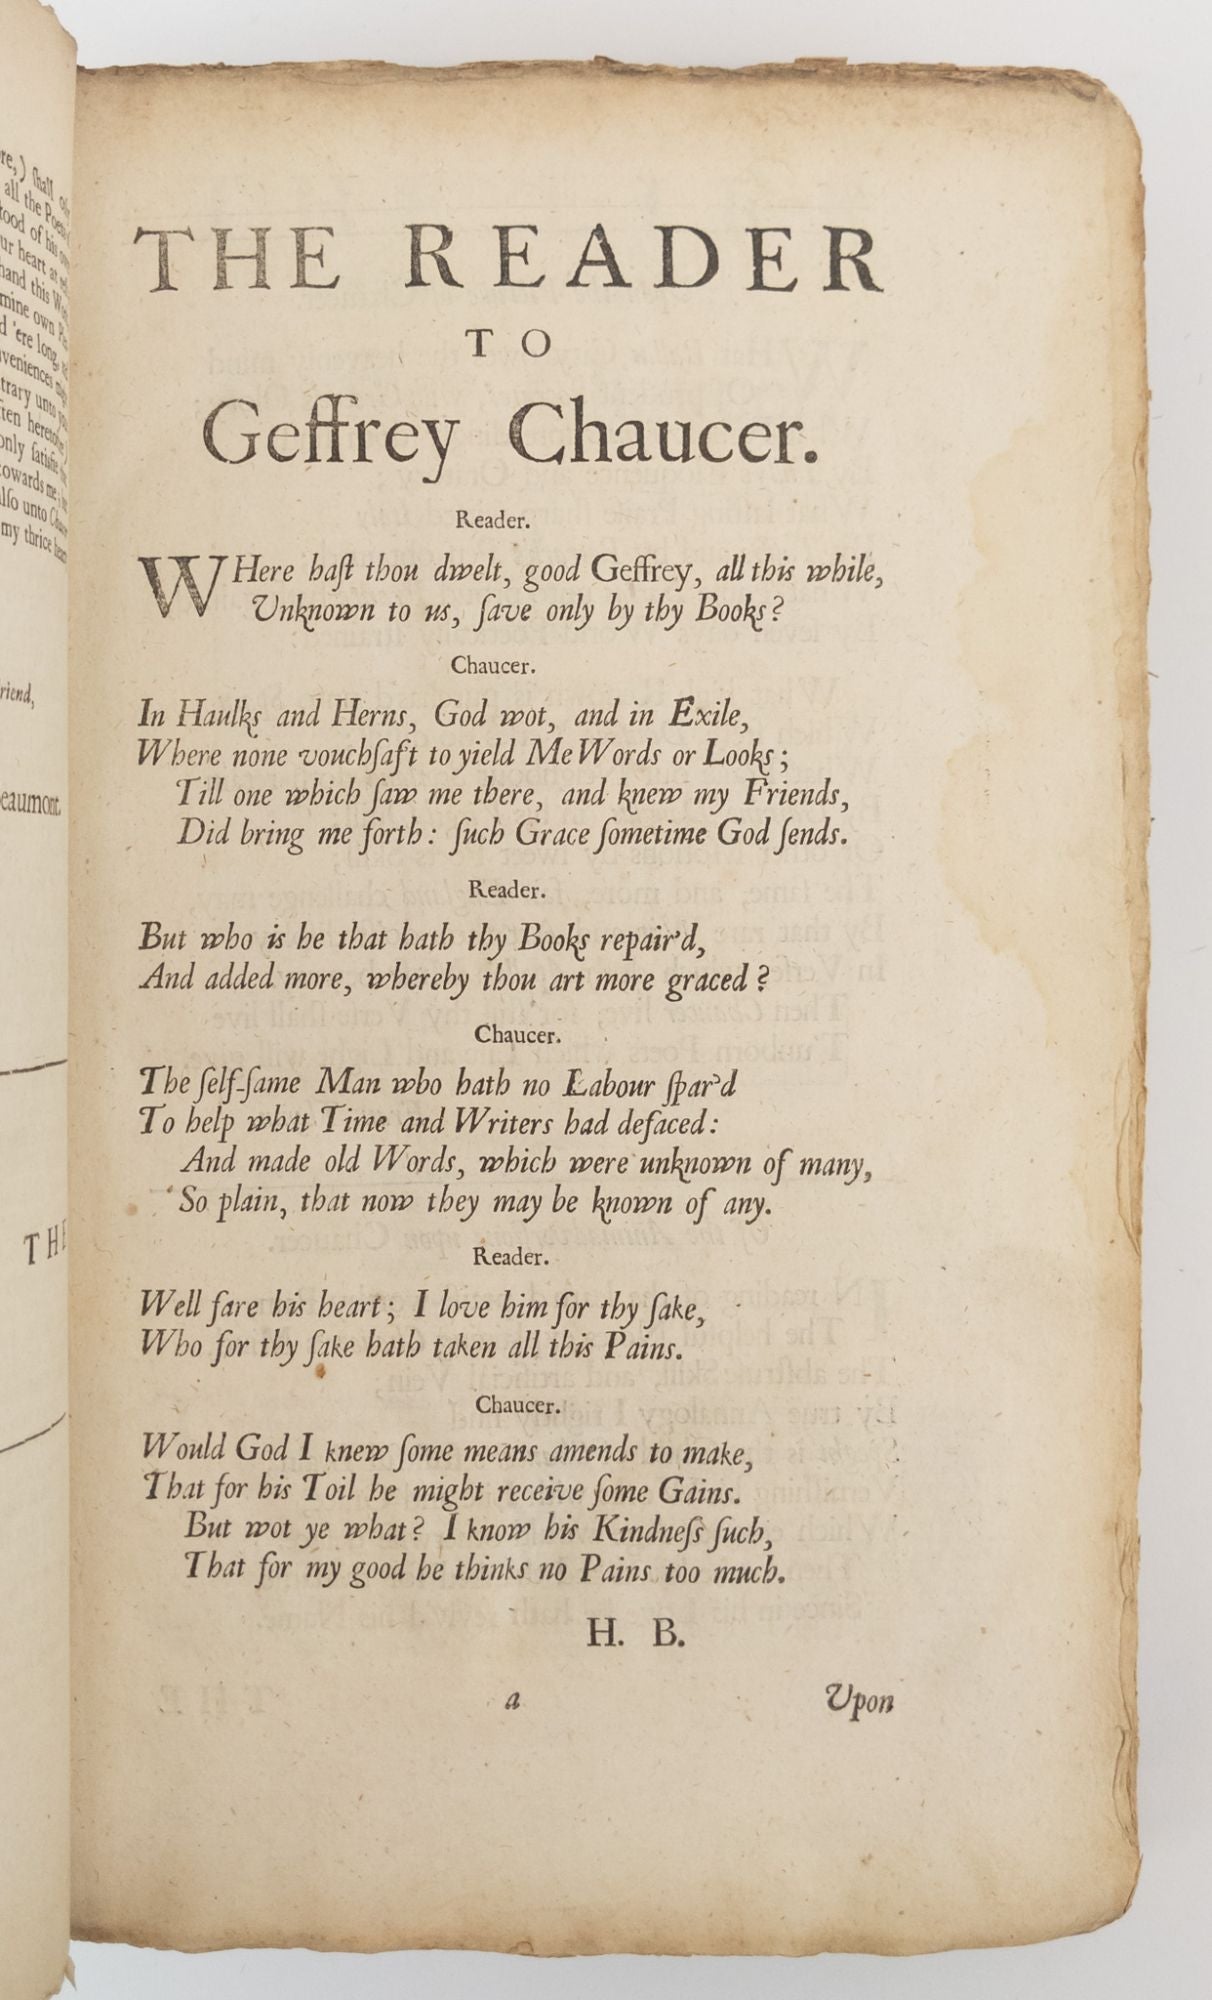 Product Image for THE WORKS OF OUR ANCIENT, LEARNED, & EXCELLENT ENGLISH POET, JEFFREY CHAUCER